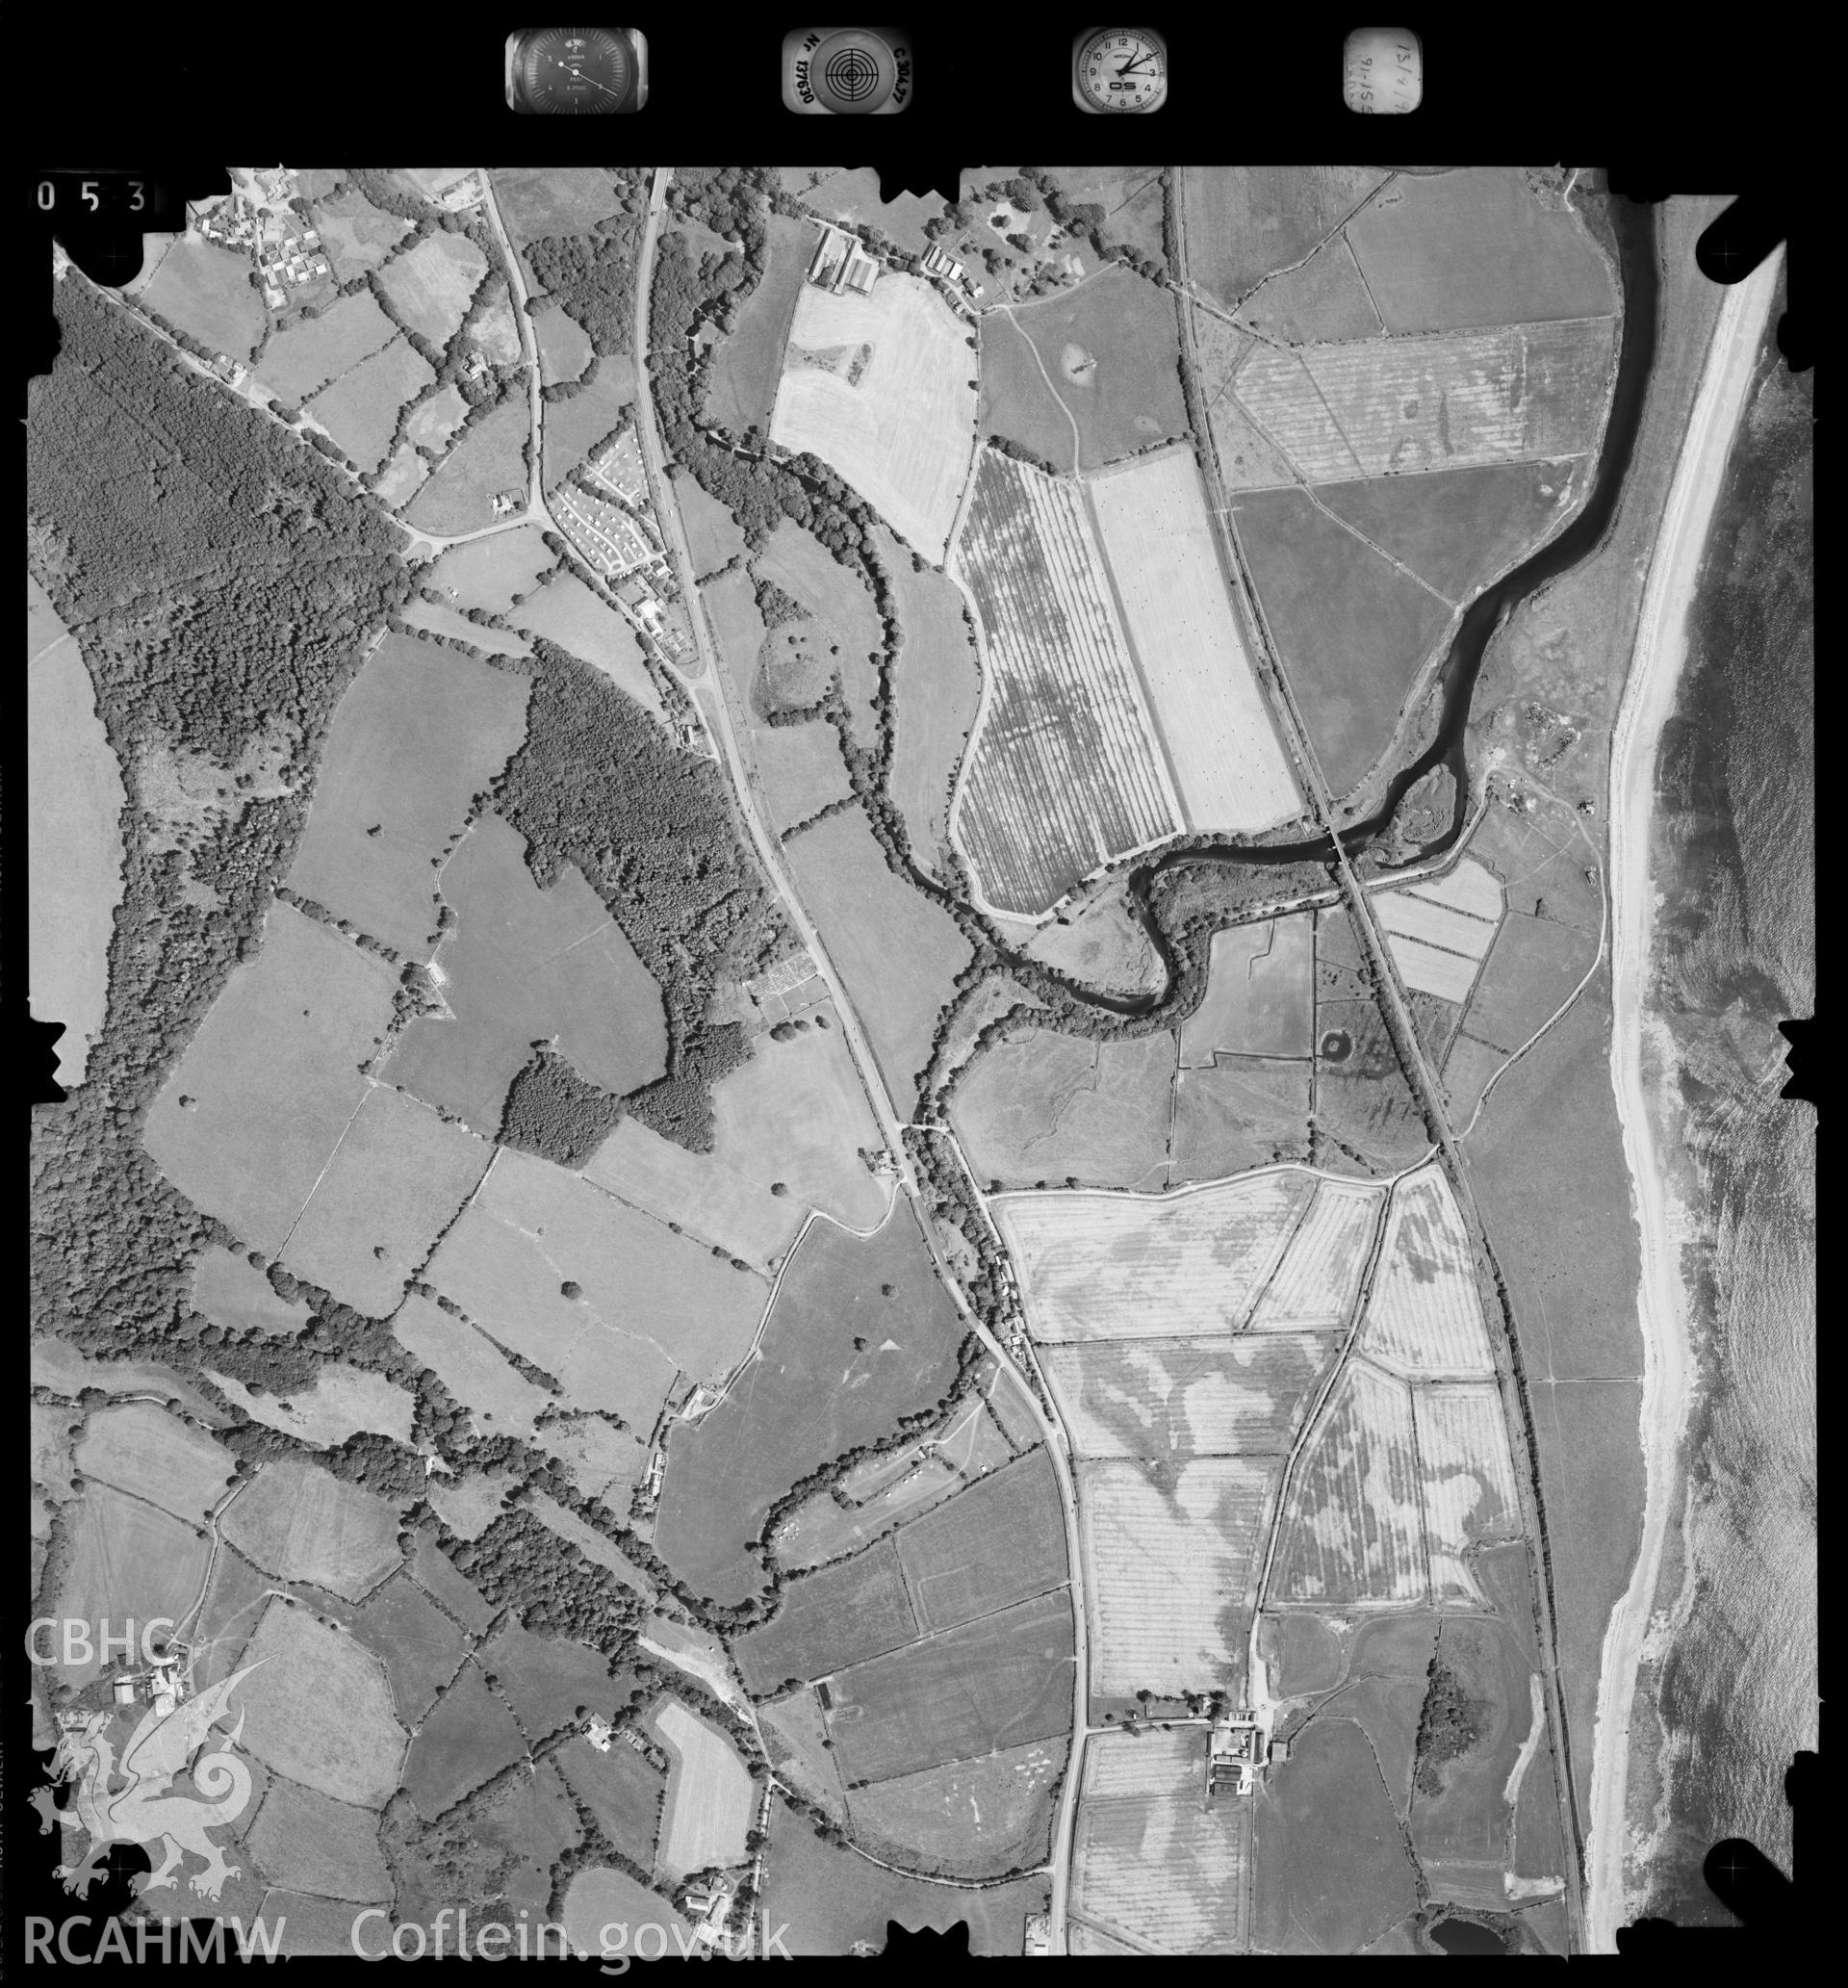 Digitized copy of an aerial photograph showing the South Lleyn area, taken by Ordnance Survey, 1991.